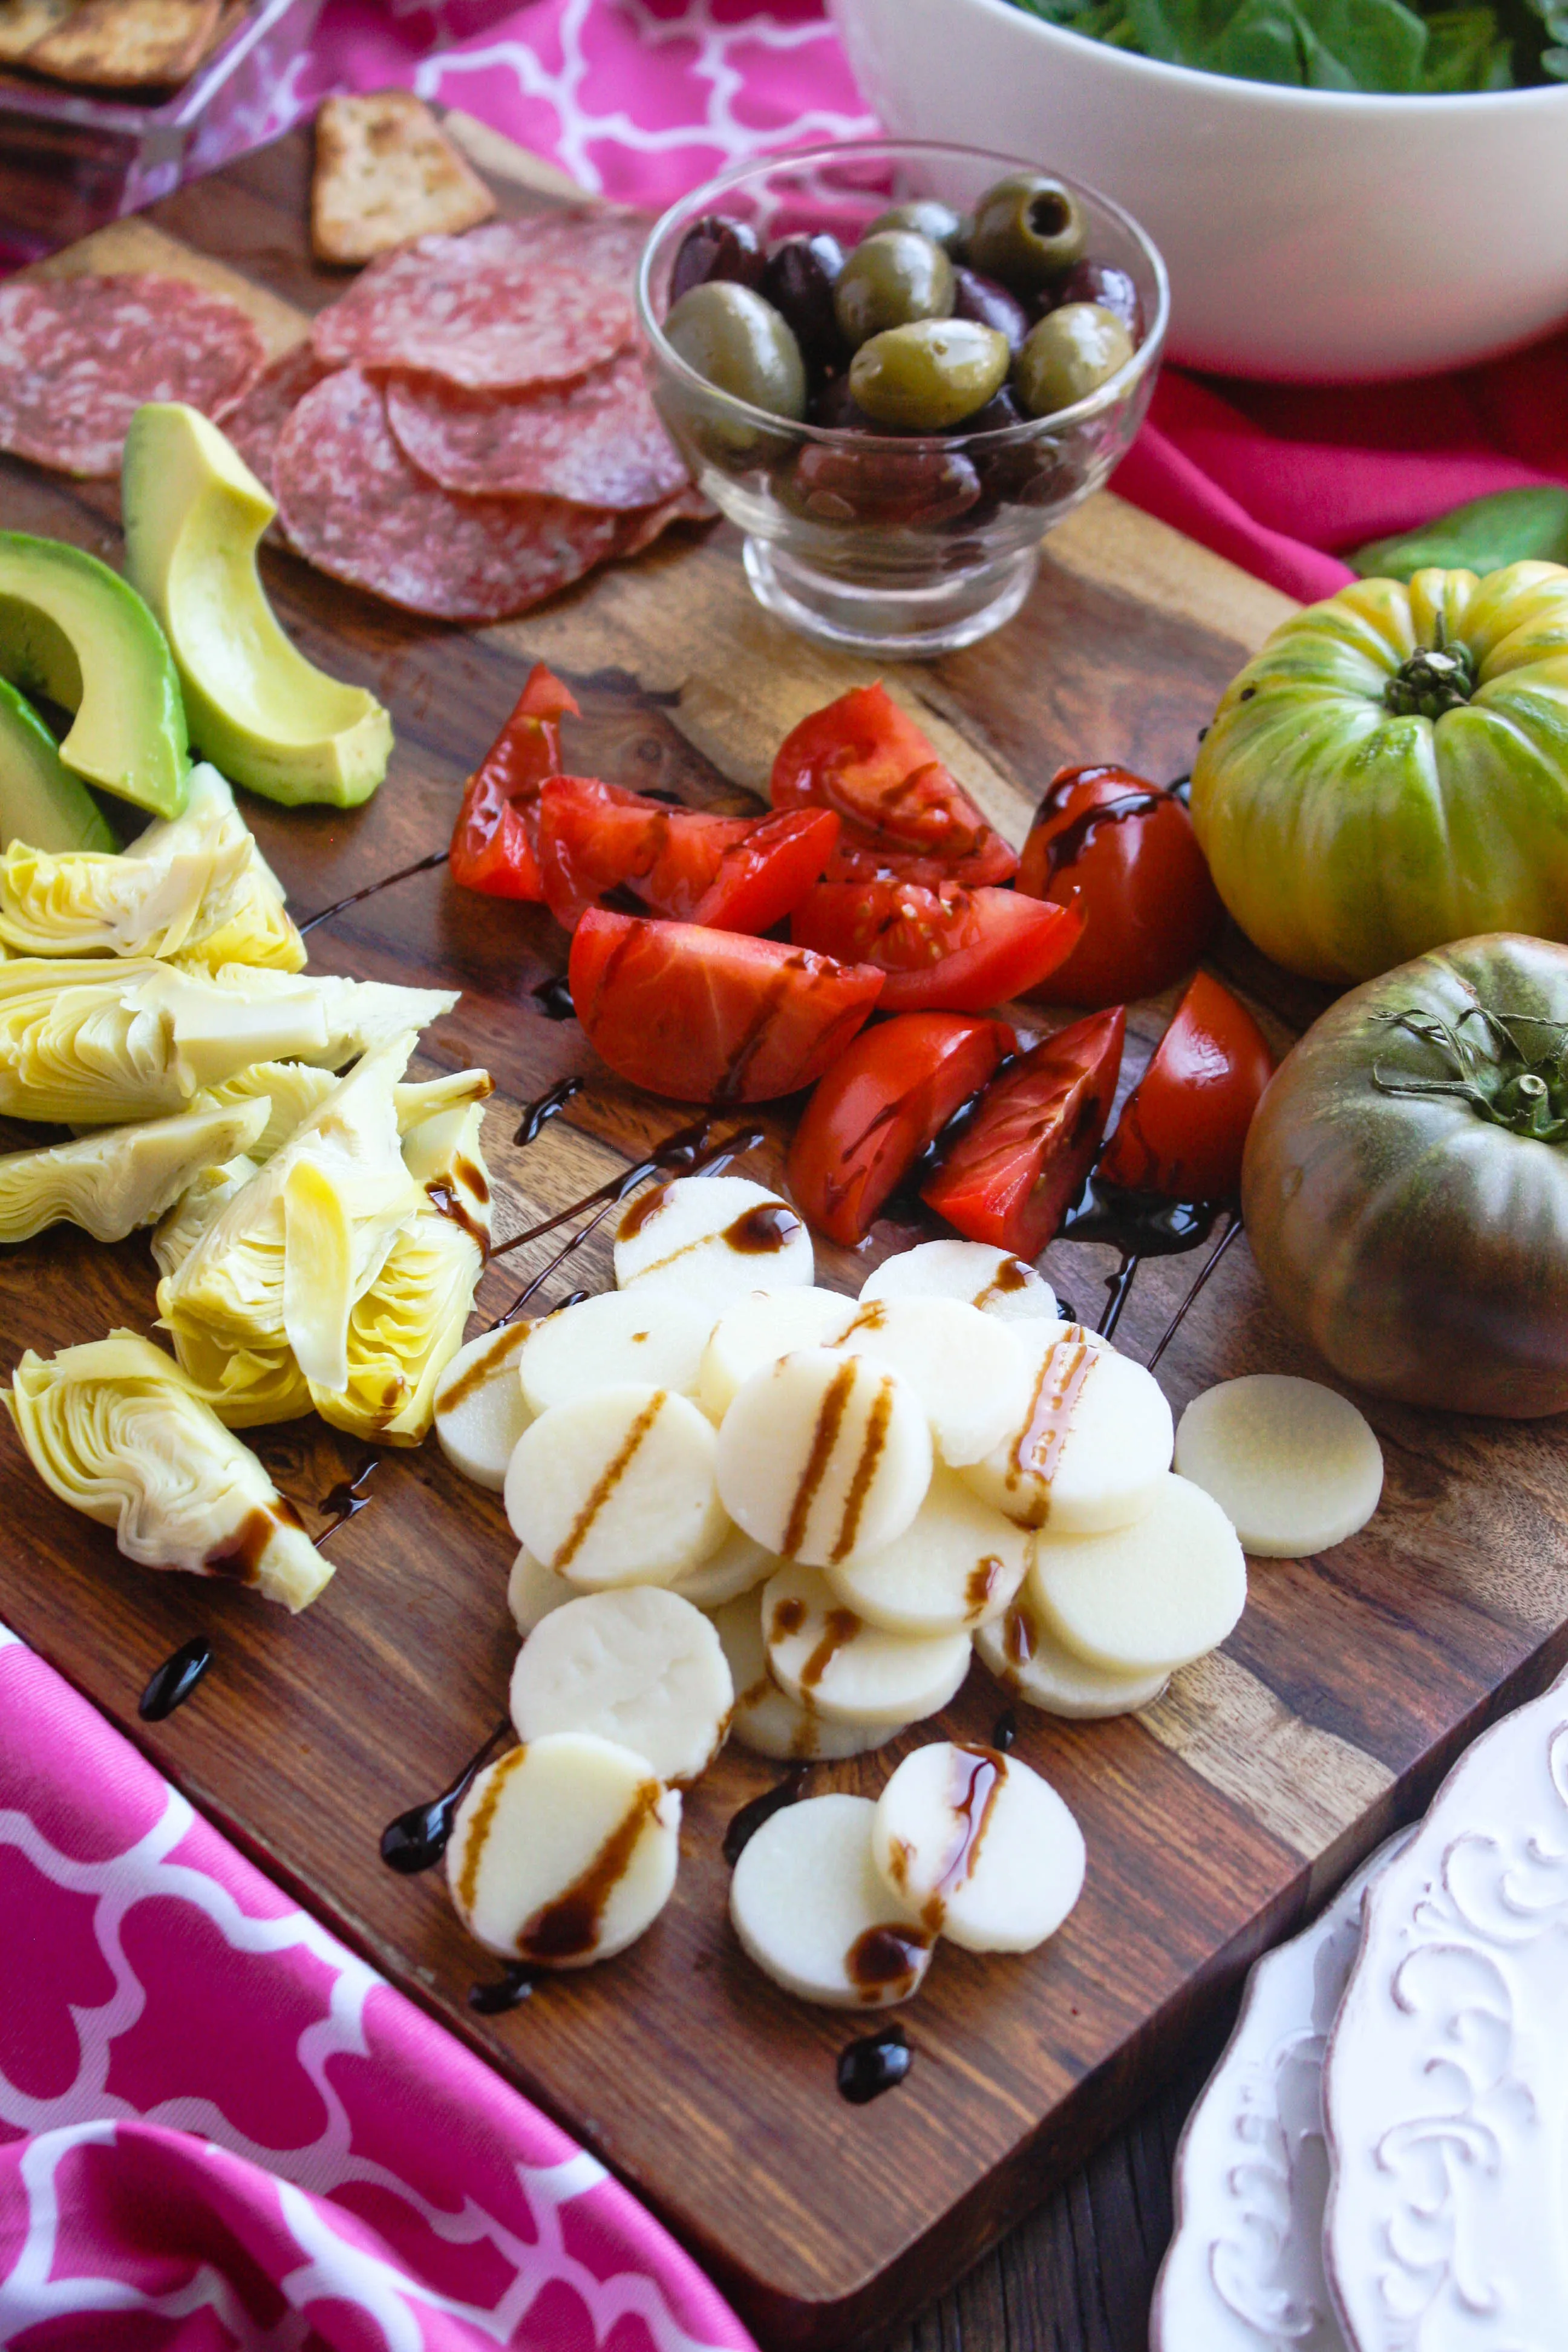 Easy Antipasto comes together quickly. It's perfect as a starter or as part of a light meal.